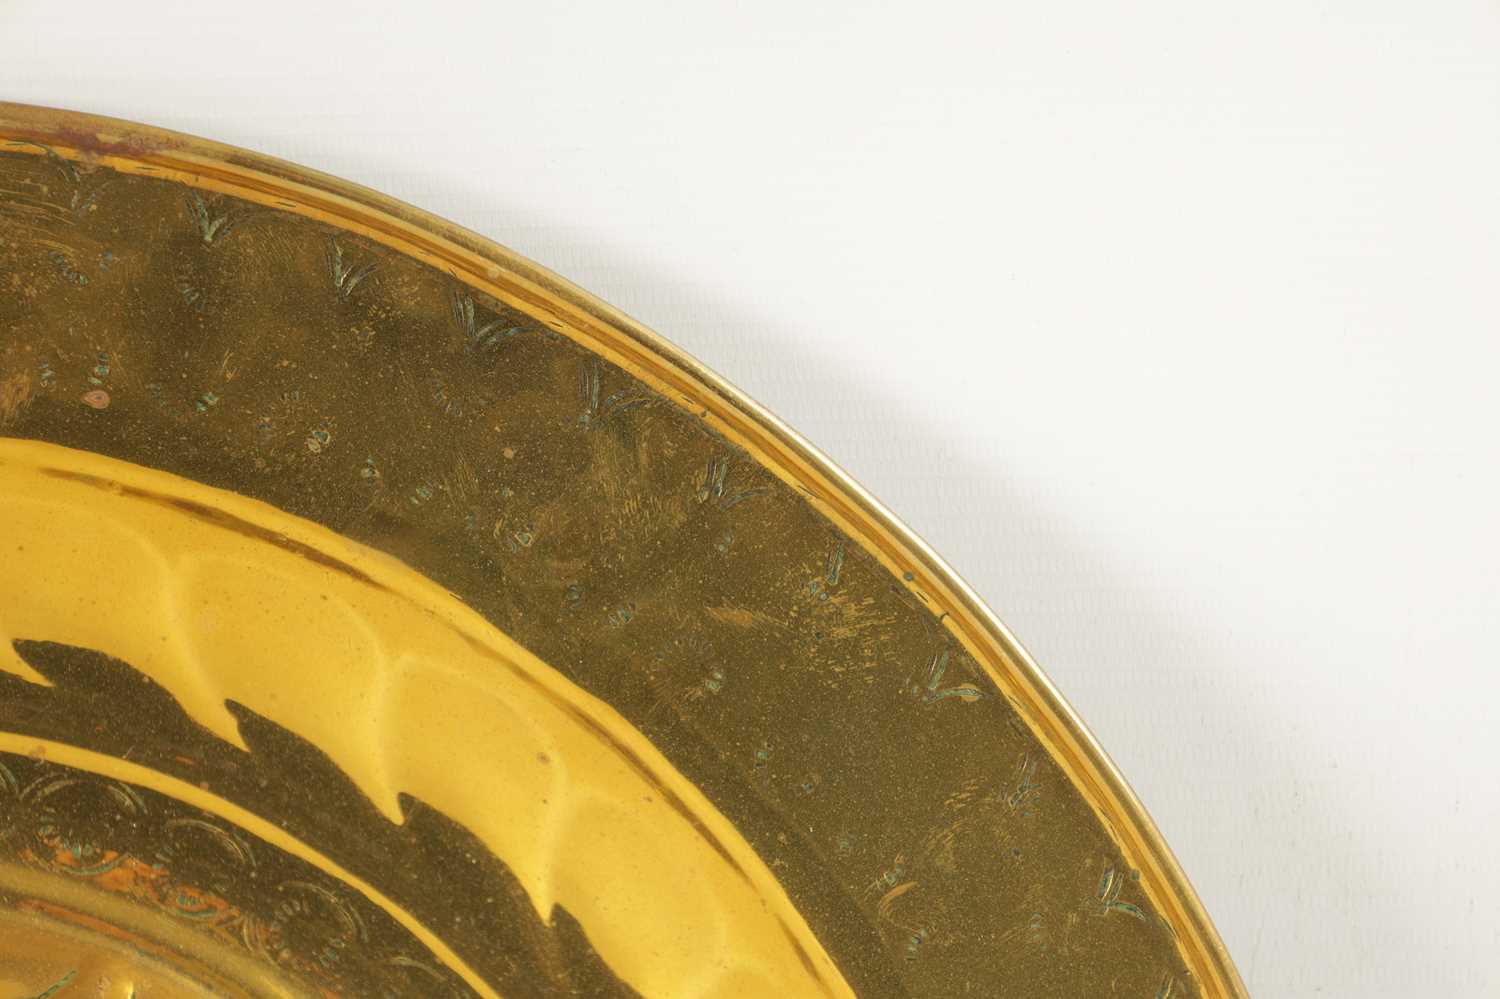 A PAIR OF 17TH CENTURY BRASS ALMS DISHES - Image 6 of 8